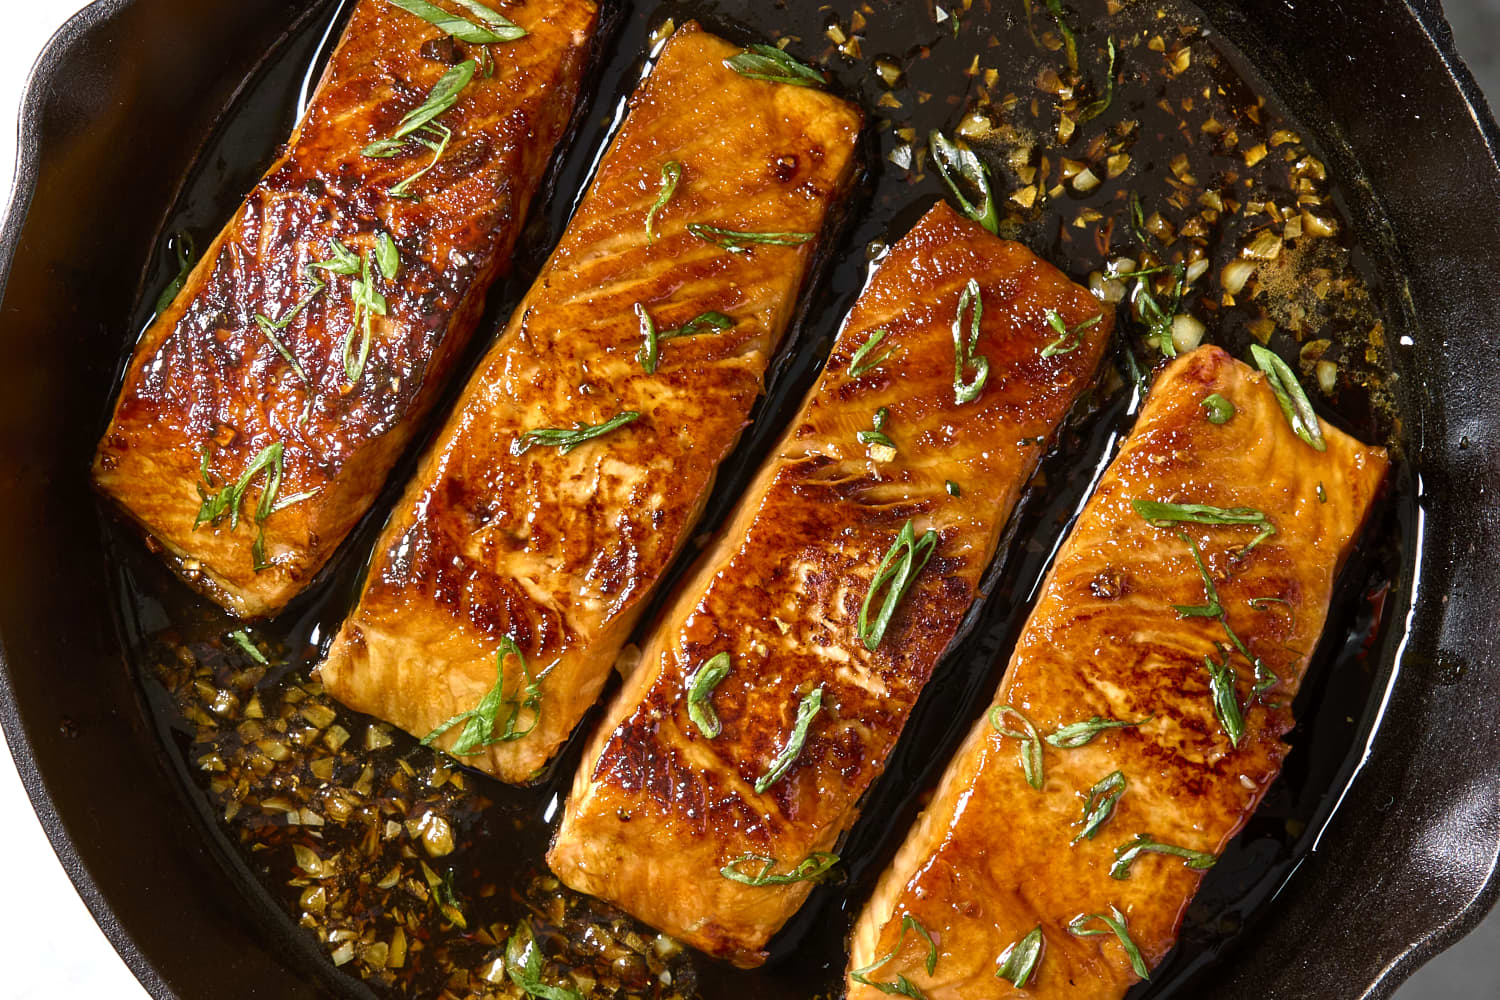 The 5-Ingredient Salmon Dinner My Family Begs Me to Make Every Single Week